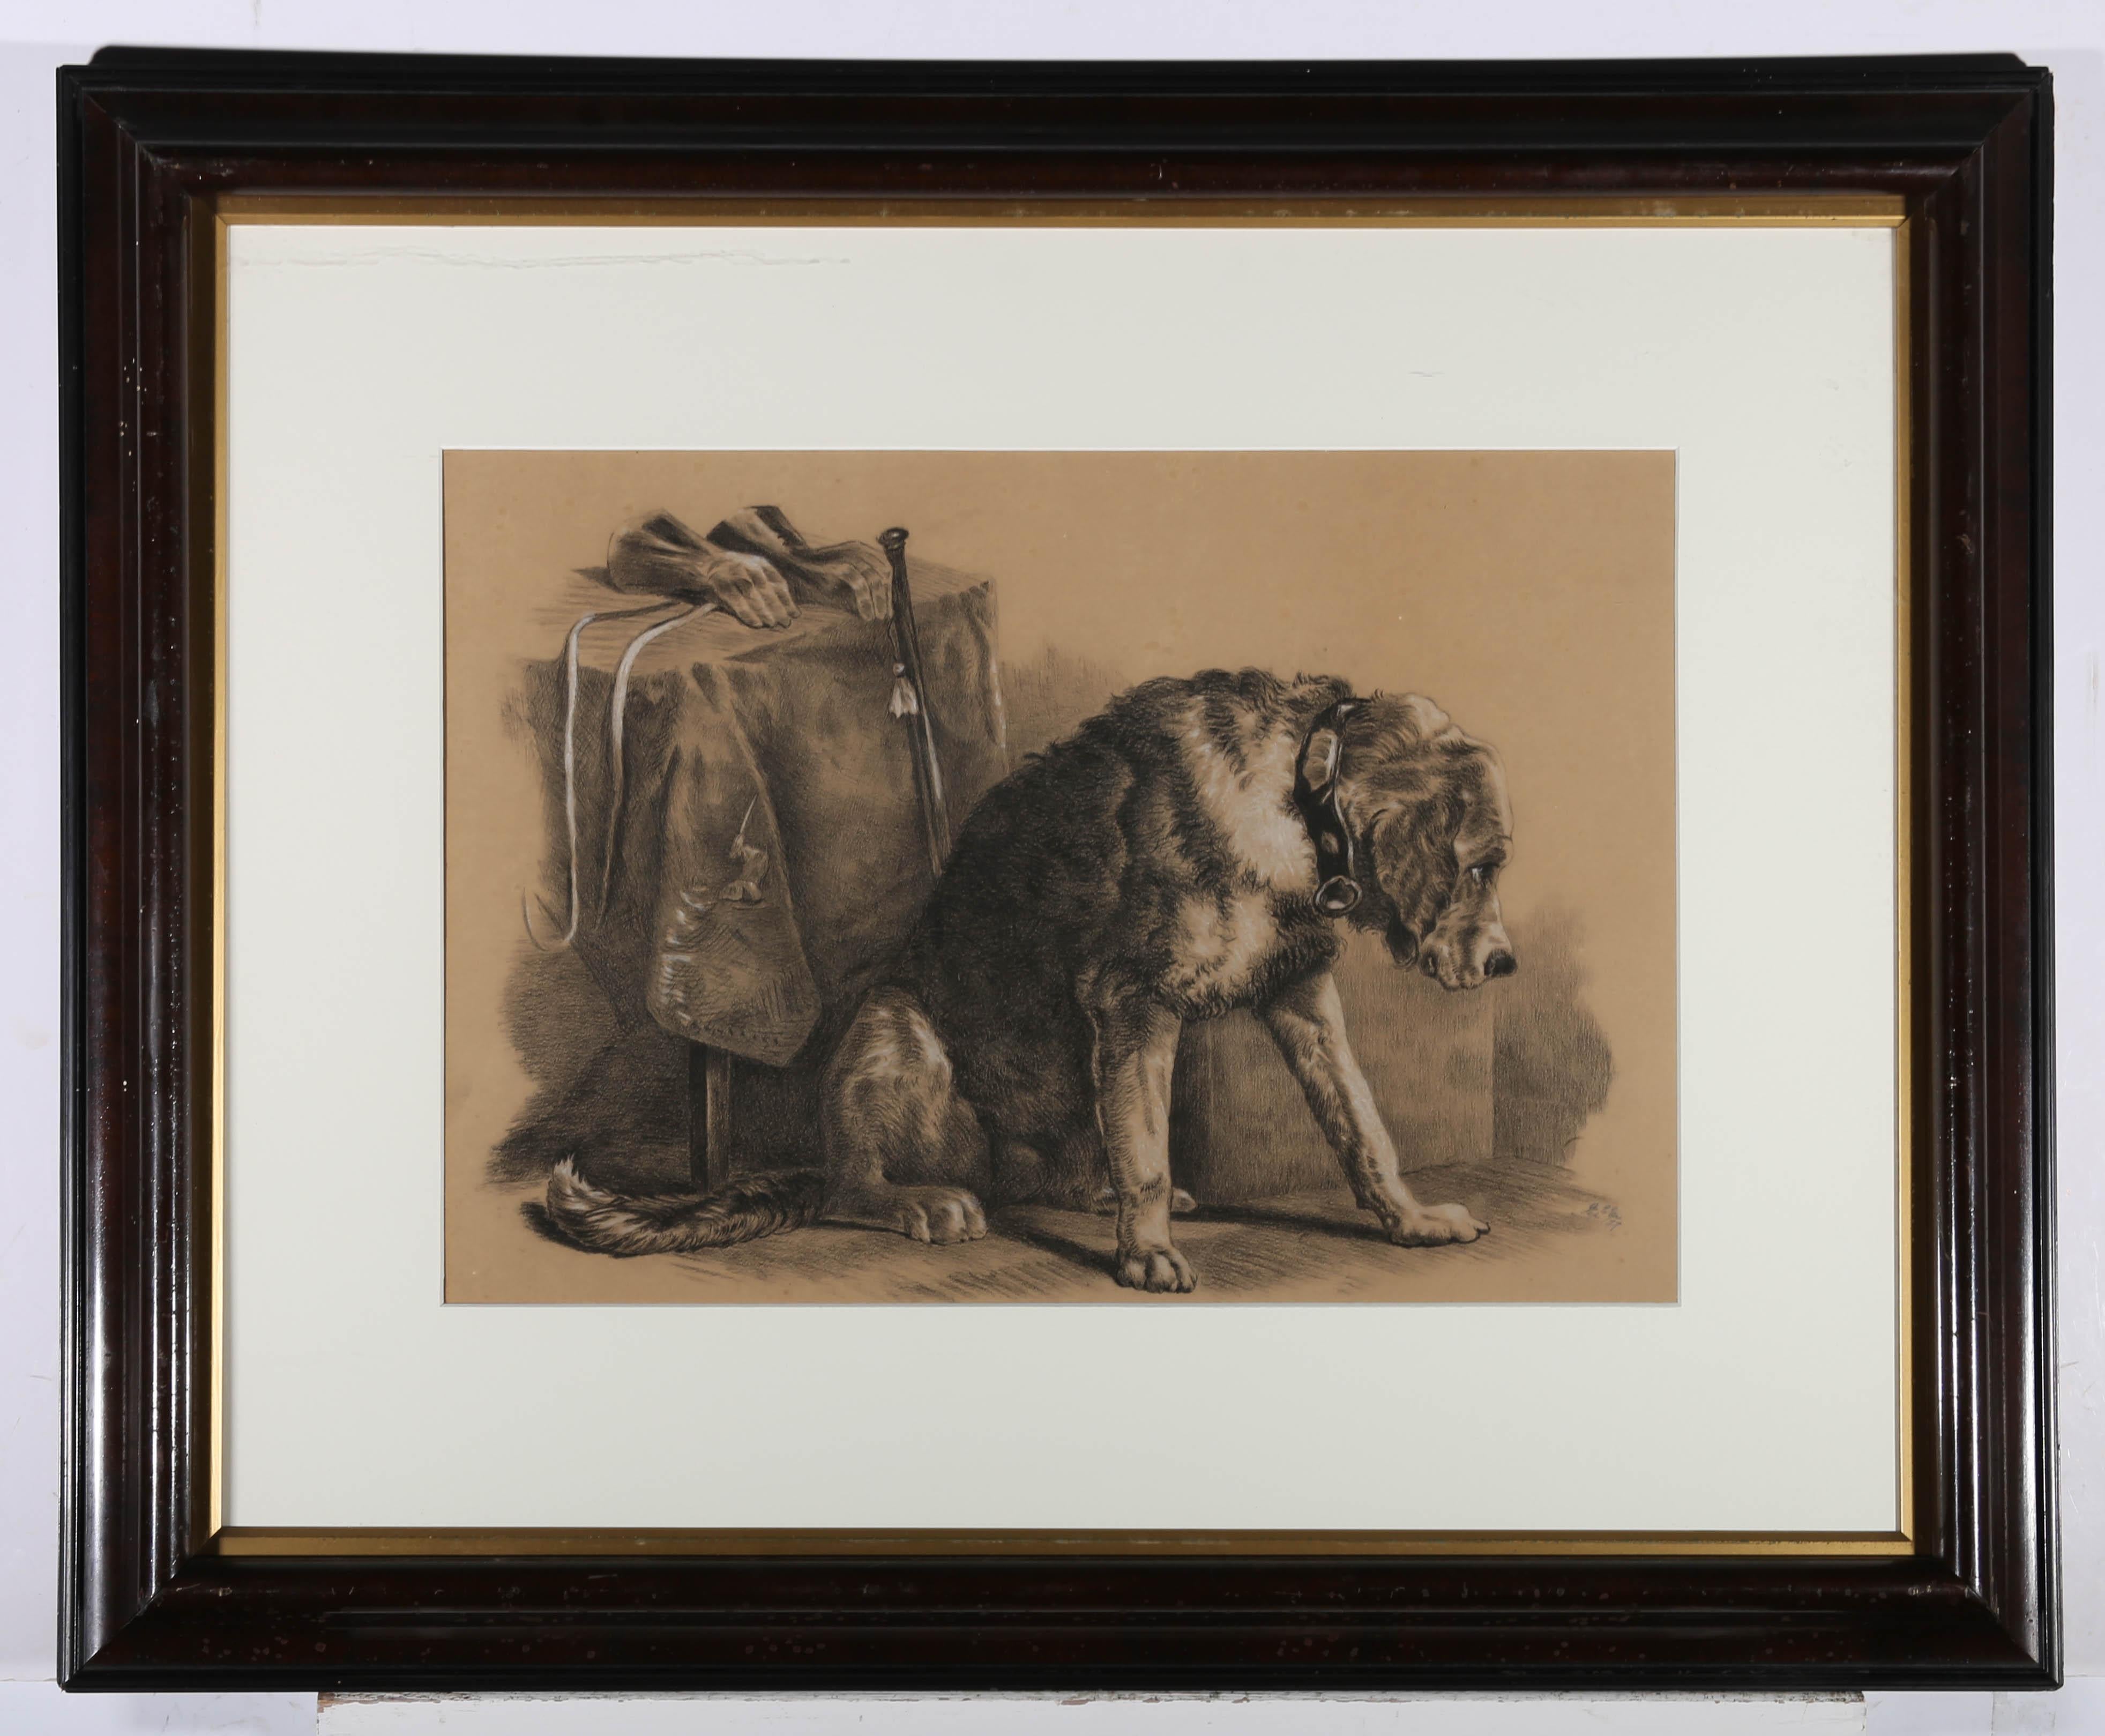 A fine charcoal and chalk study of a sad looking hound seated beside a table, with hunting accessories. Illegibly signed to the lower right. Presented in a grand mahogany frame with gilt inner slip. Glazed. On brown paper.




